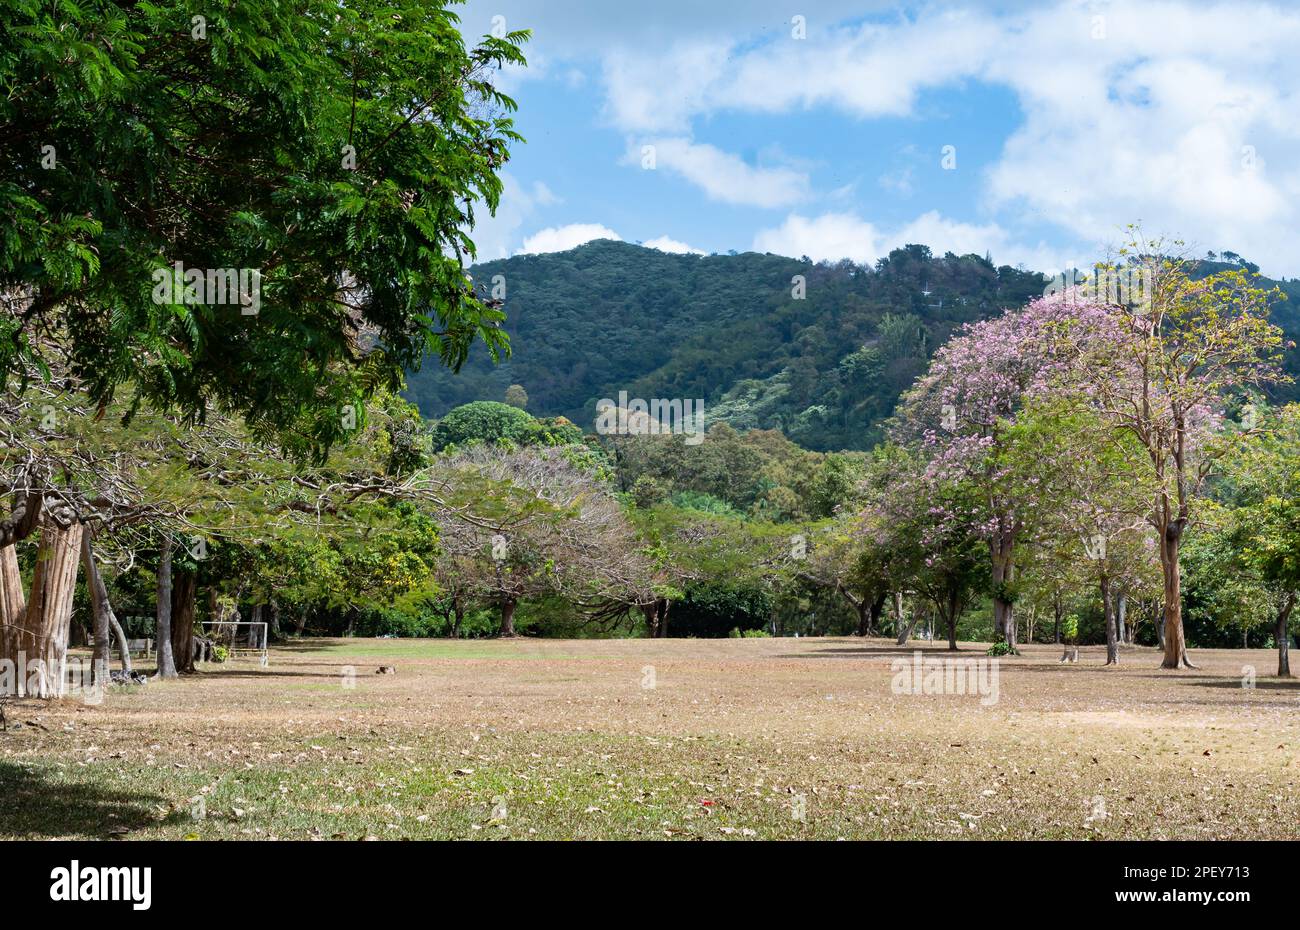 Beautiful Queen's Park Savannah with pink Poui trees in bloom in Trinidad and Tobago. Stock Photo